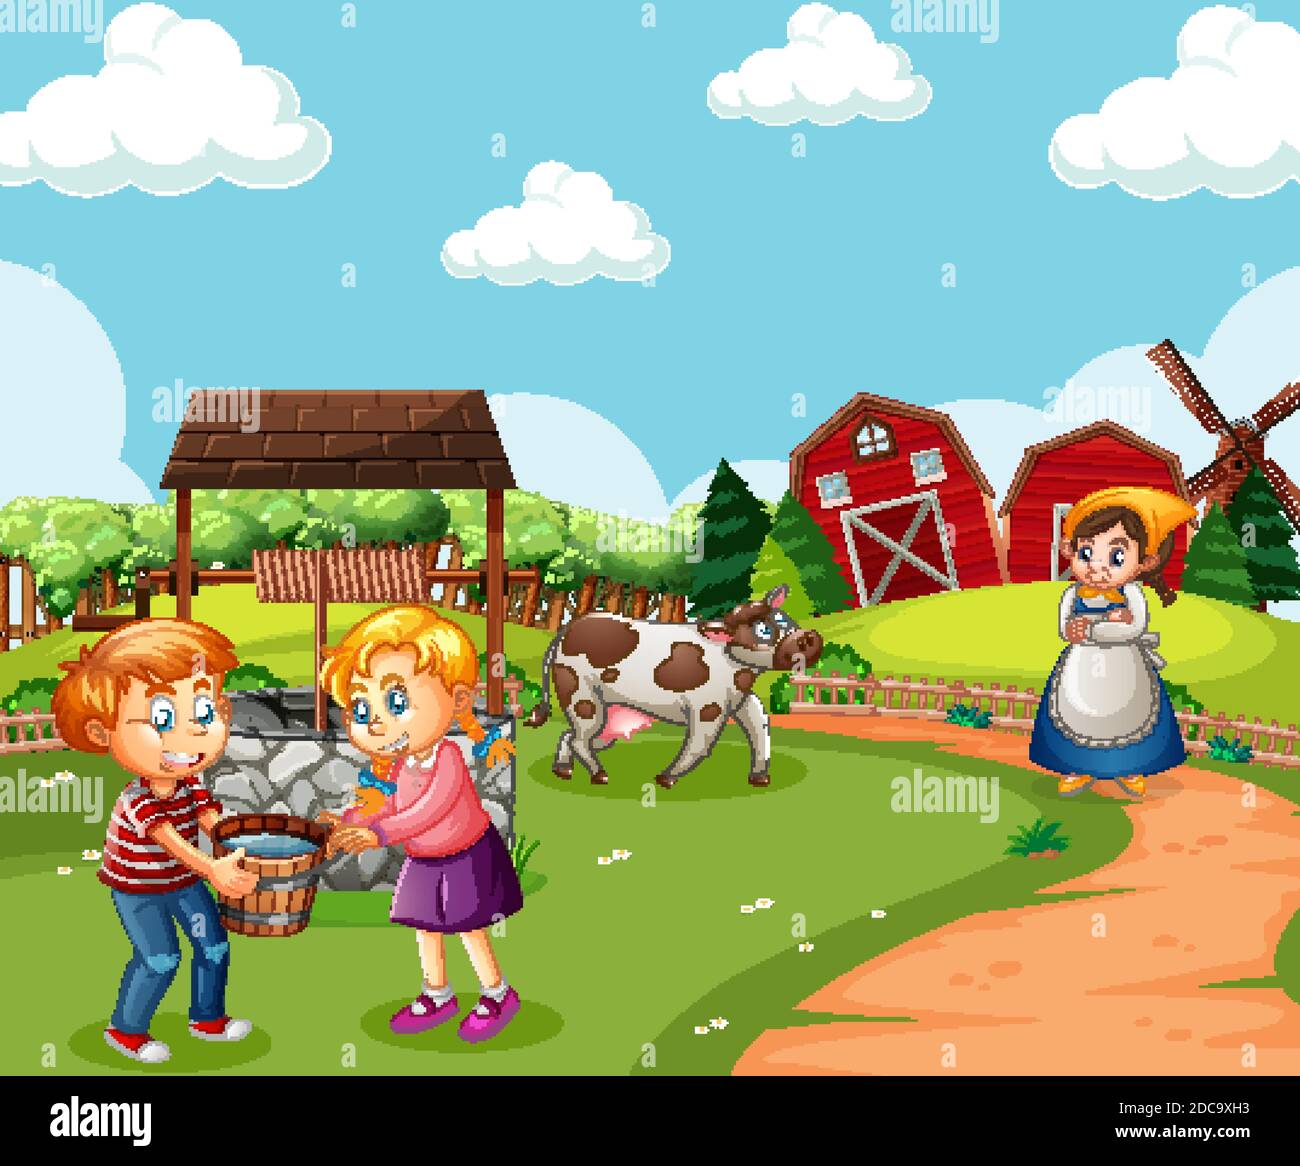 Farm with red barn and windmill scene illustration Stock Vector